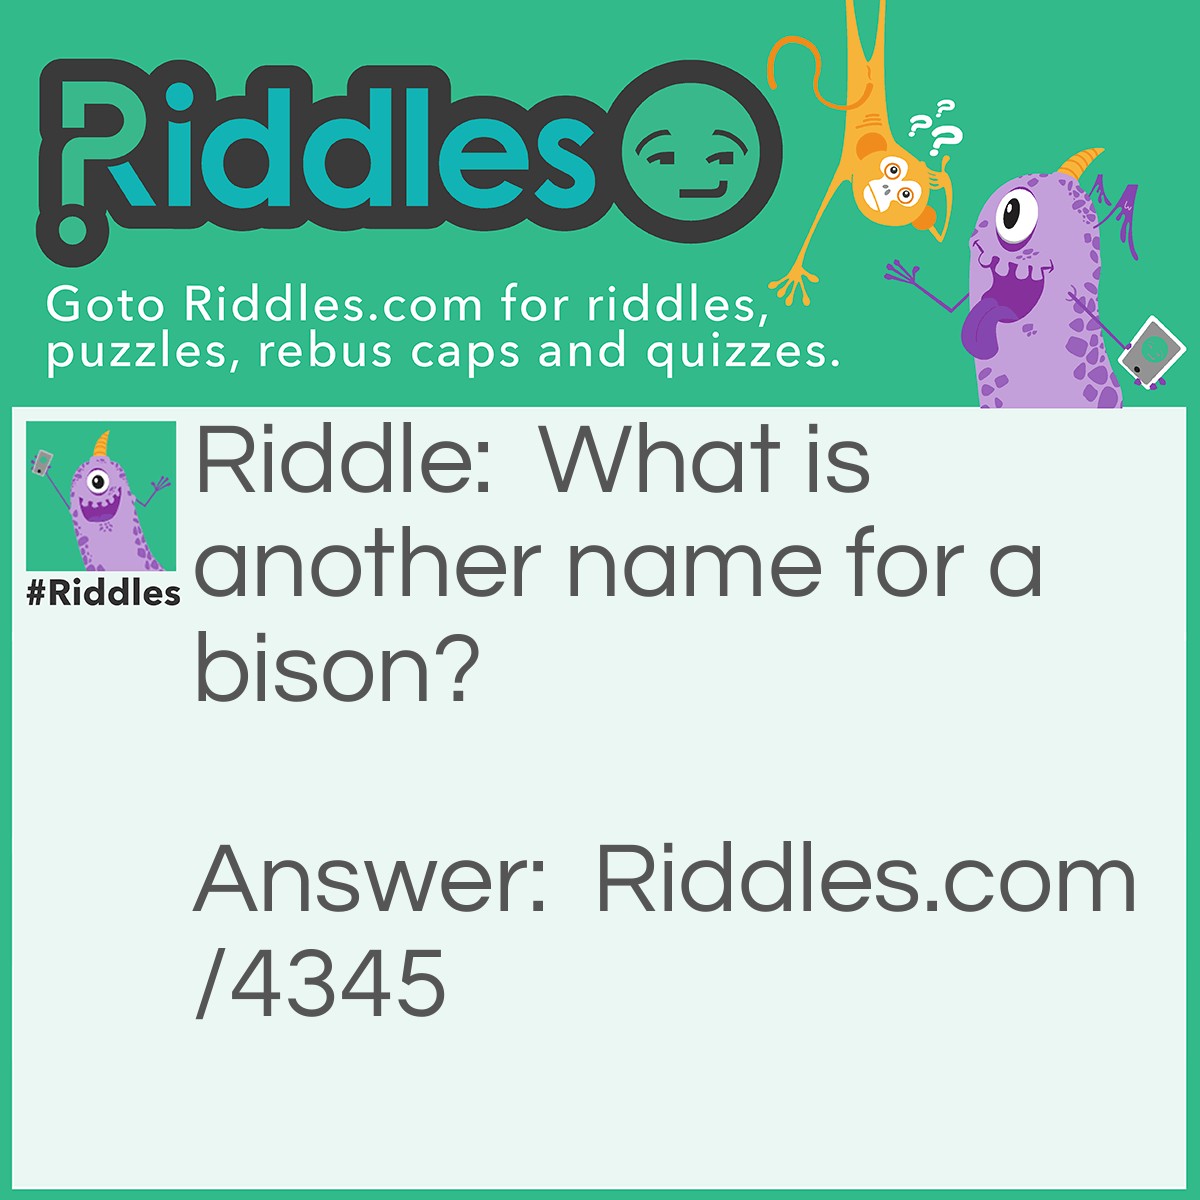 Riddle: What is another name for a bison? Answer: Buffalo.